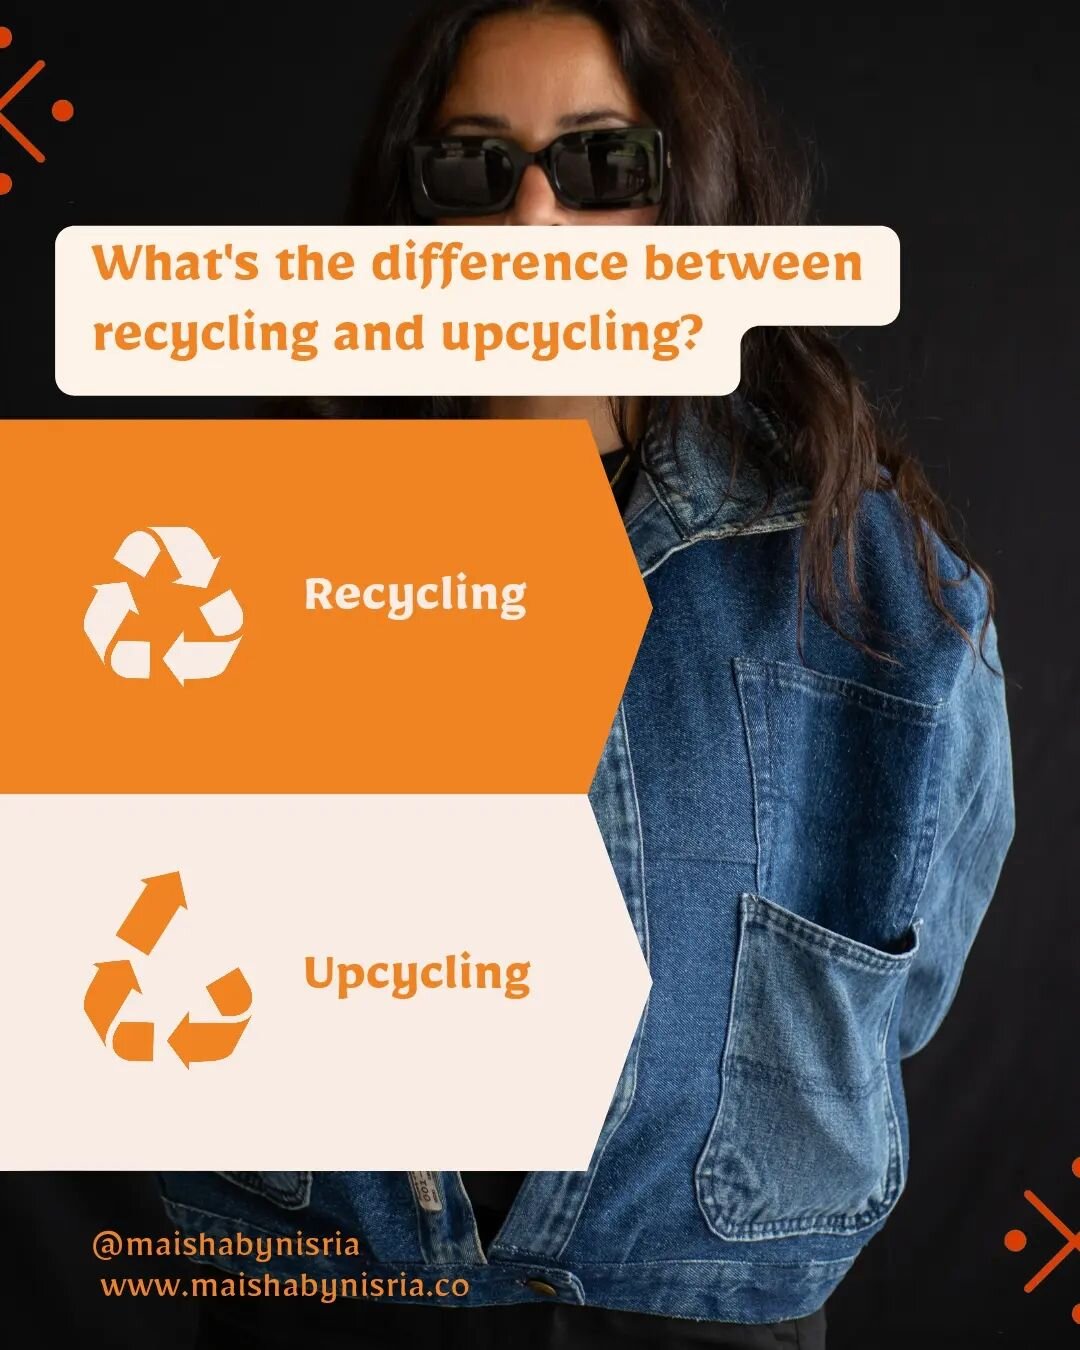 Let's clear the confusion! 🔄♻️ We often get asked about the difference between upcycling and recycling. 
Here's a quick breakdown: 

Recycling involves breaking down materials and reusing them to create new products. While recycling is important for